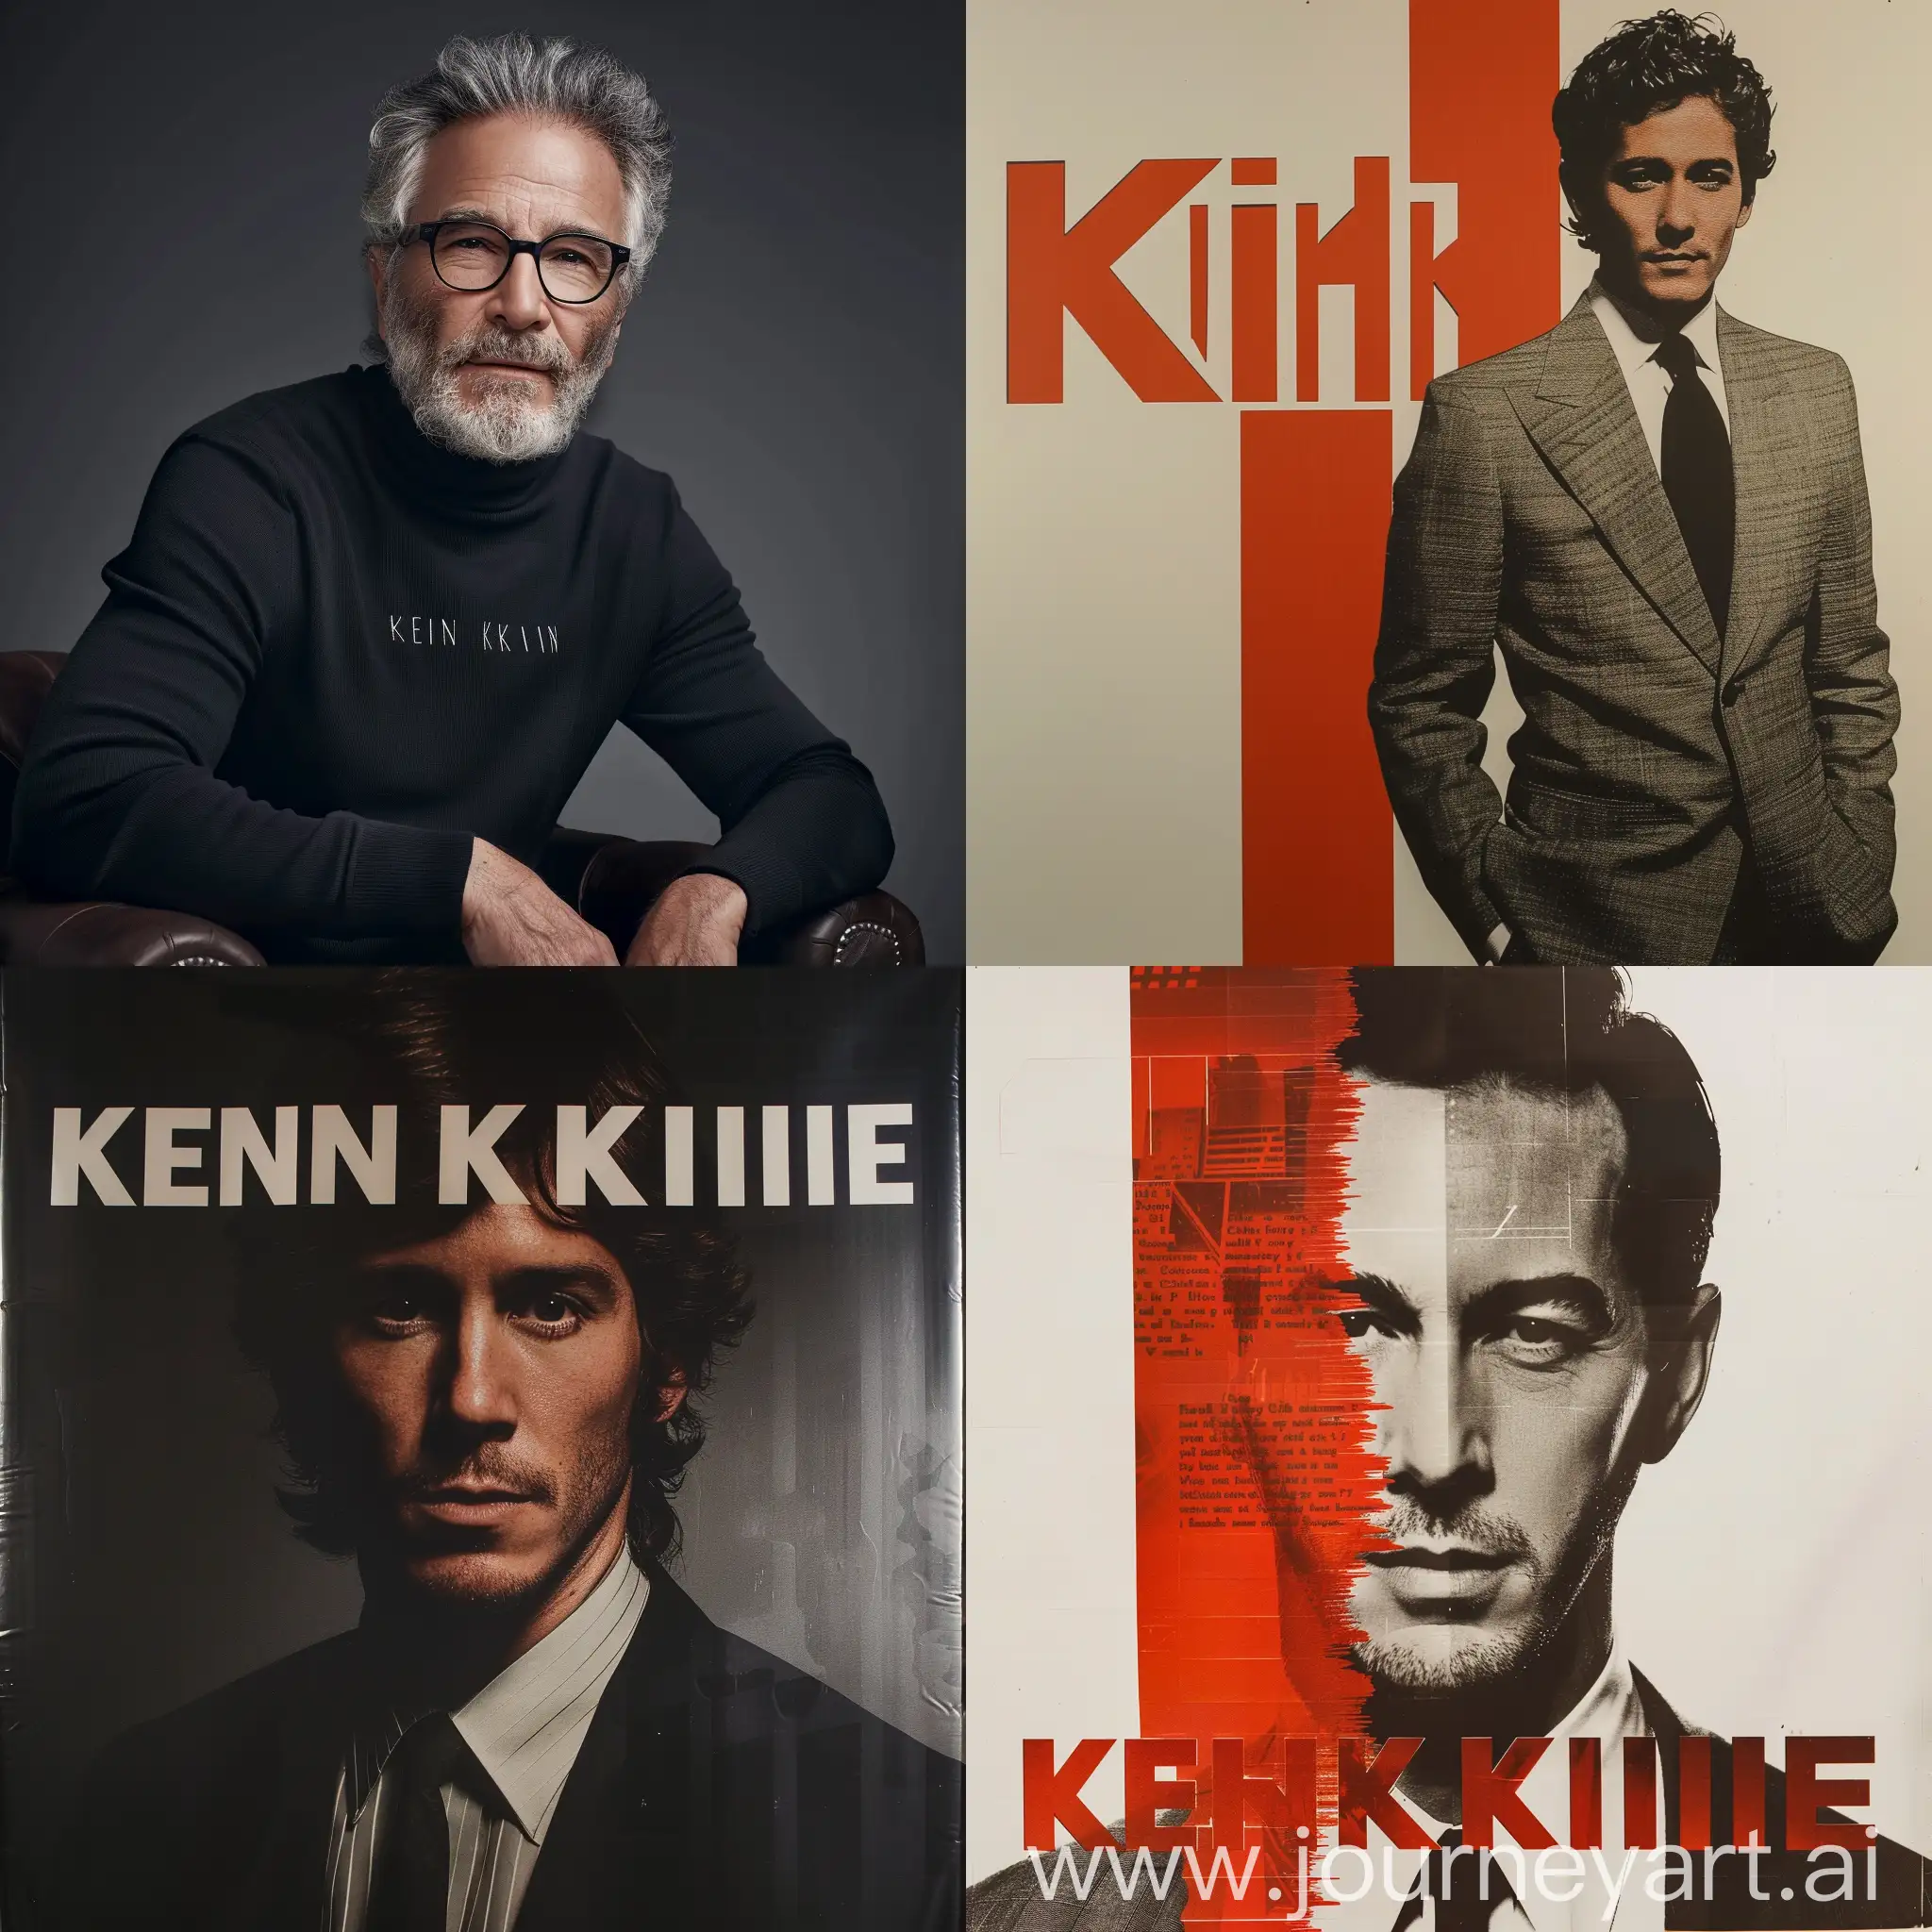 an ad for "Kevin Kline" similar to the company "Calvin Klein"